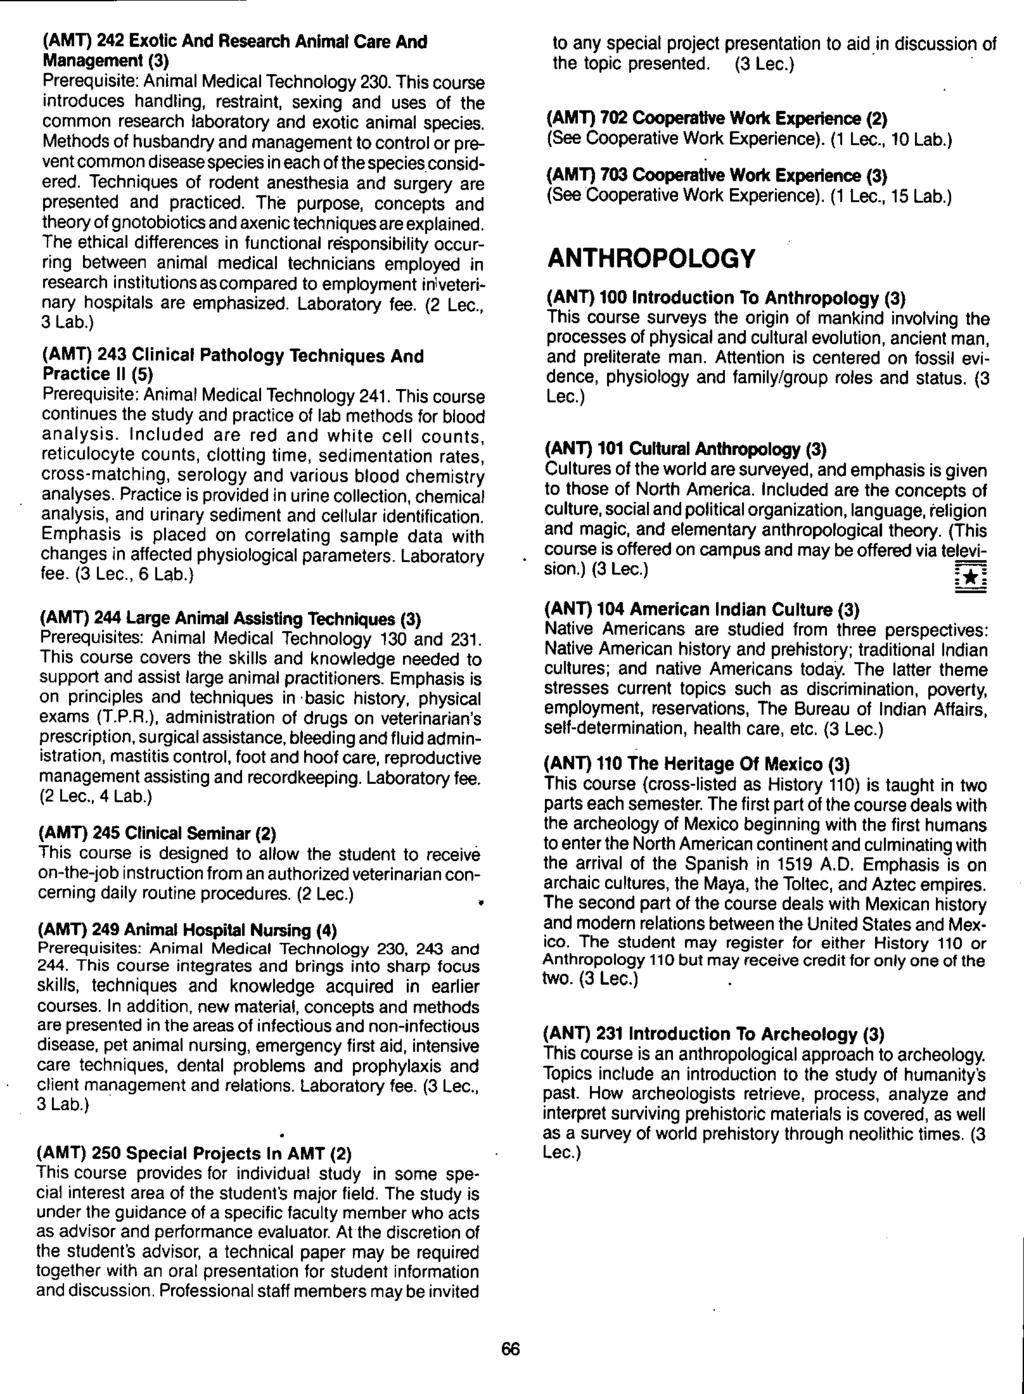 (AMT) 242 Exotic And Research Animal Care And Management (3) Prerequisite: Animal Medical Technology 230.